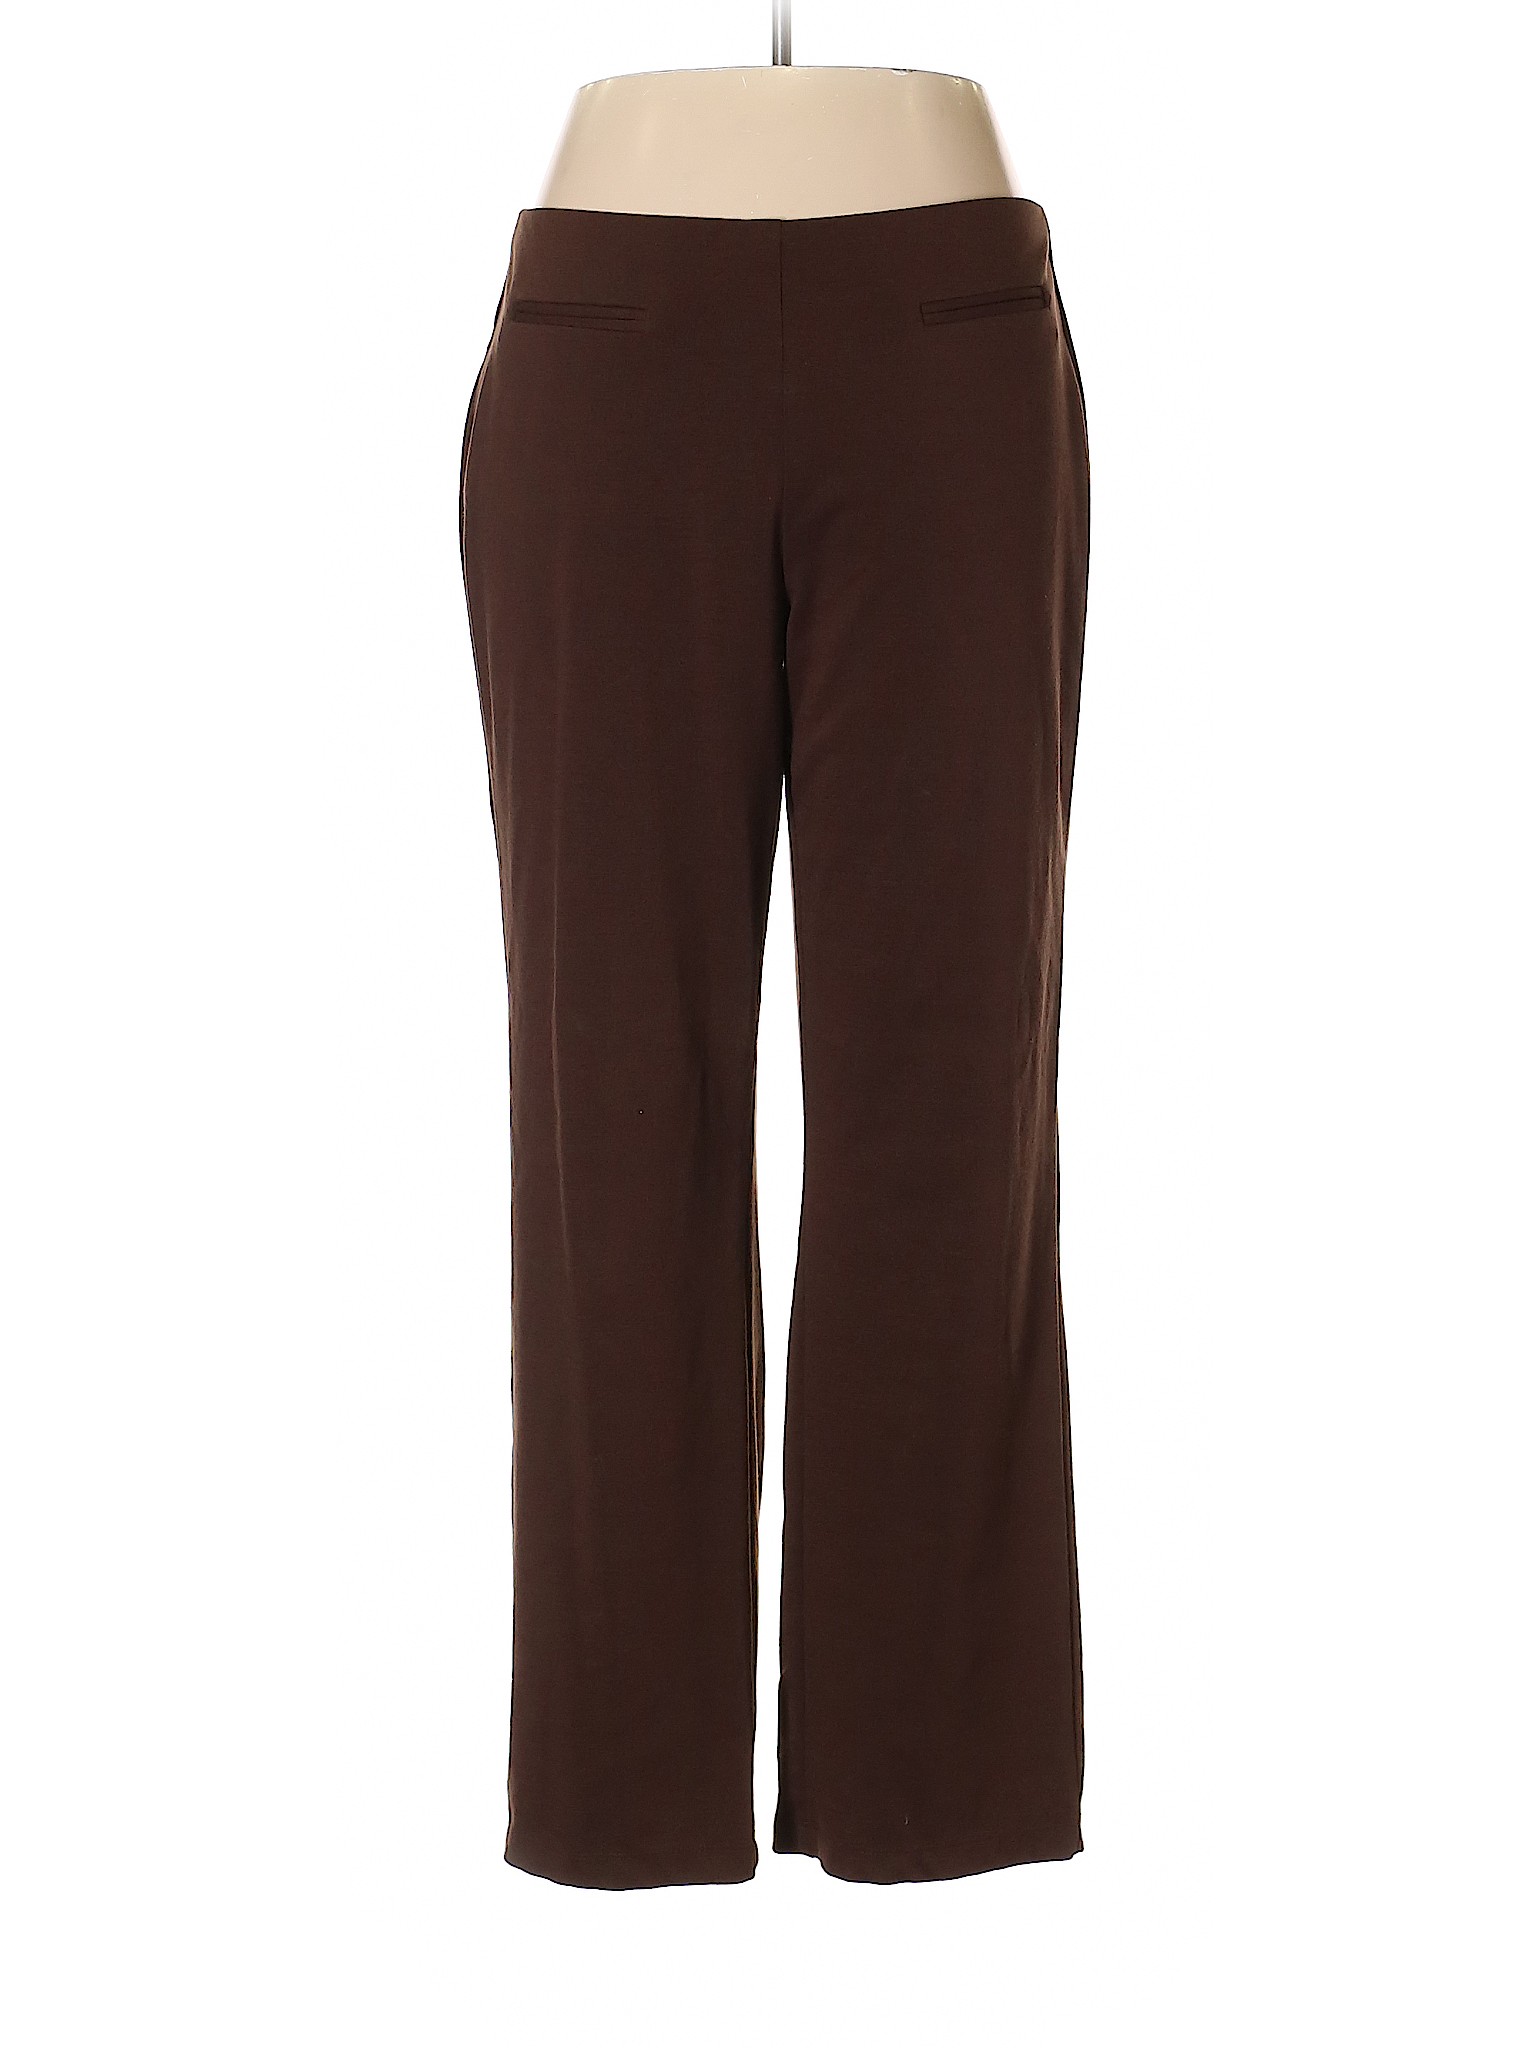 Cato Solid Brown Casual Pants Size 14 - 16 - 70% off | thredUP